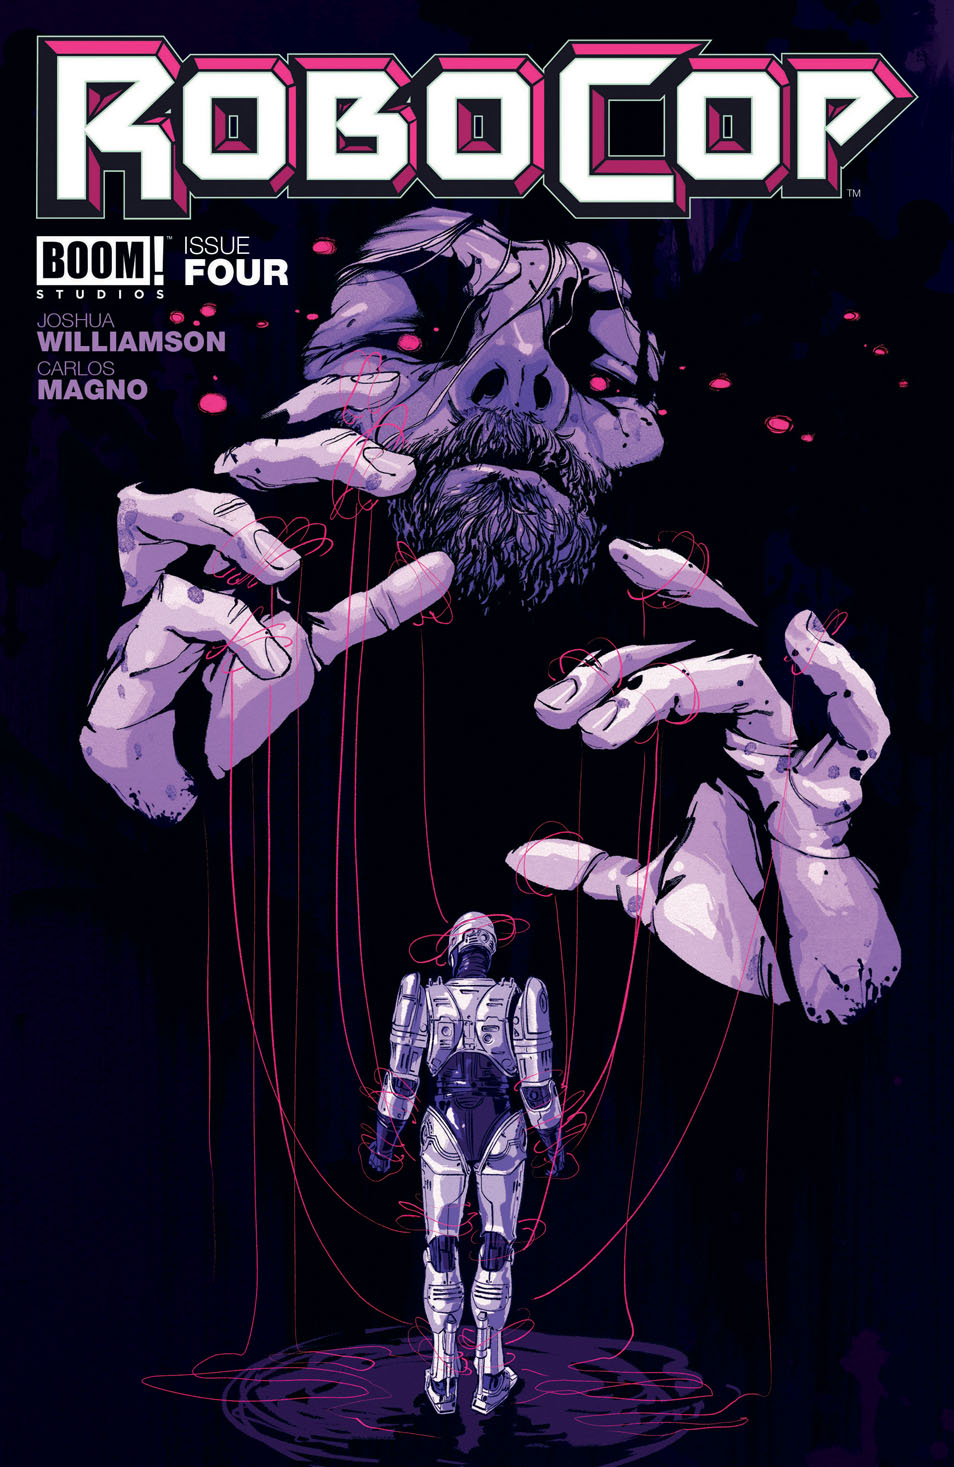 This image is the cover for the book RoboCop: Dead or Alive #4, RoboCop: Dead or Alive